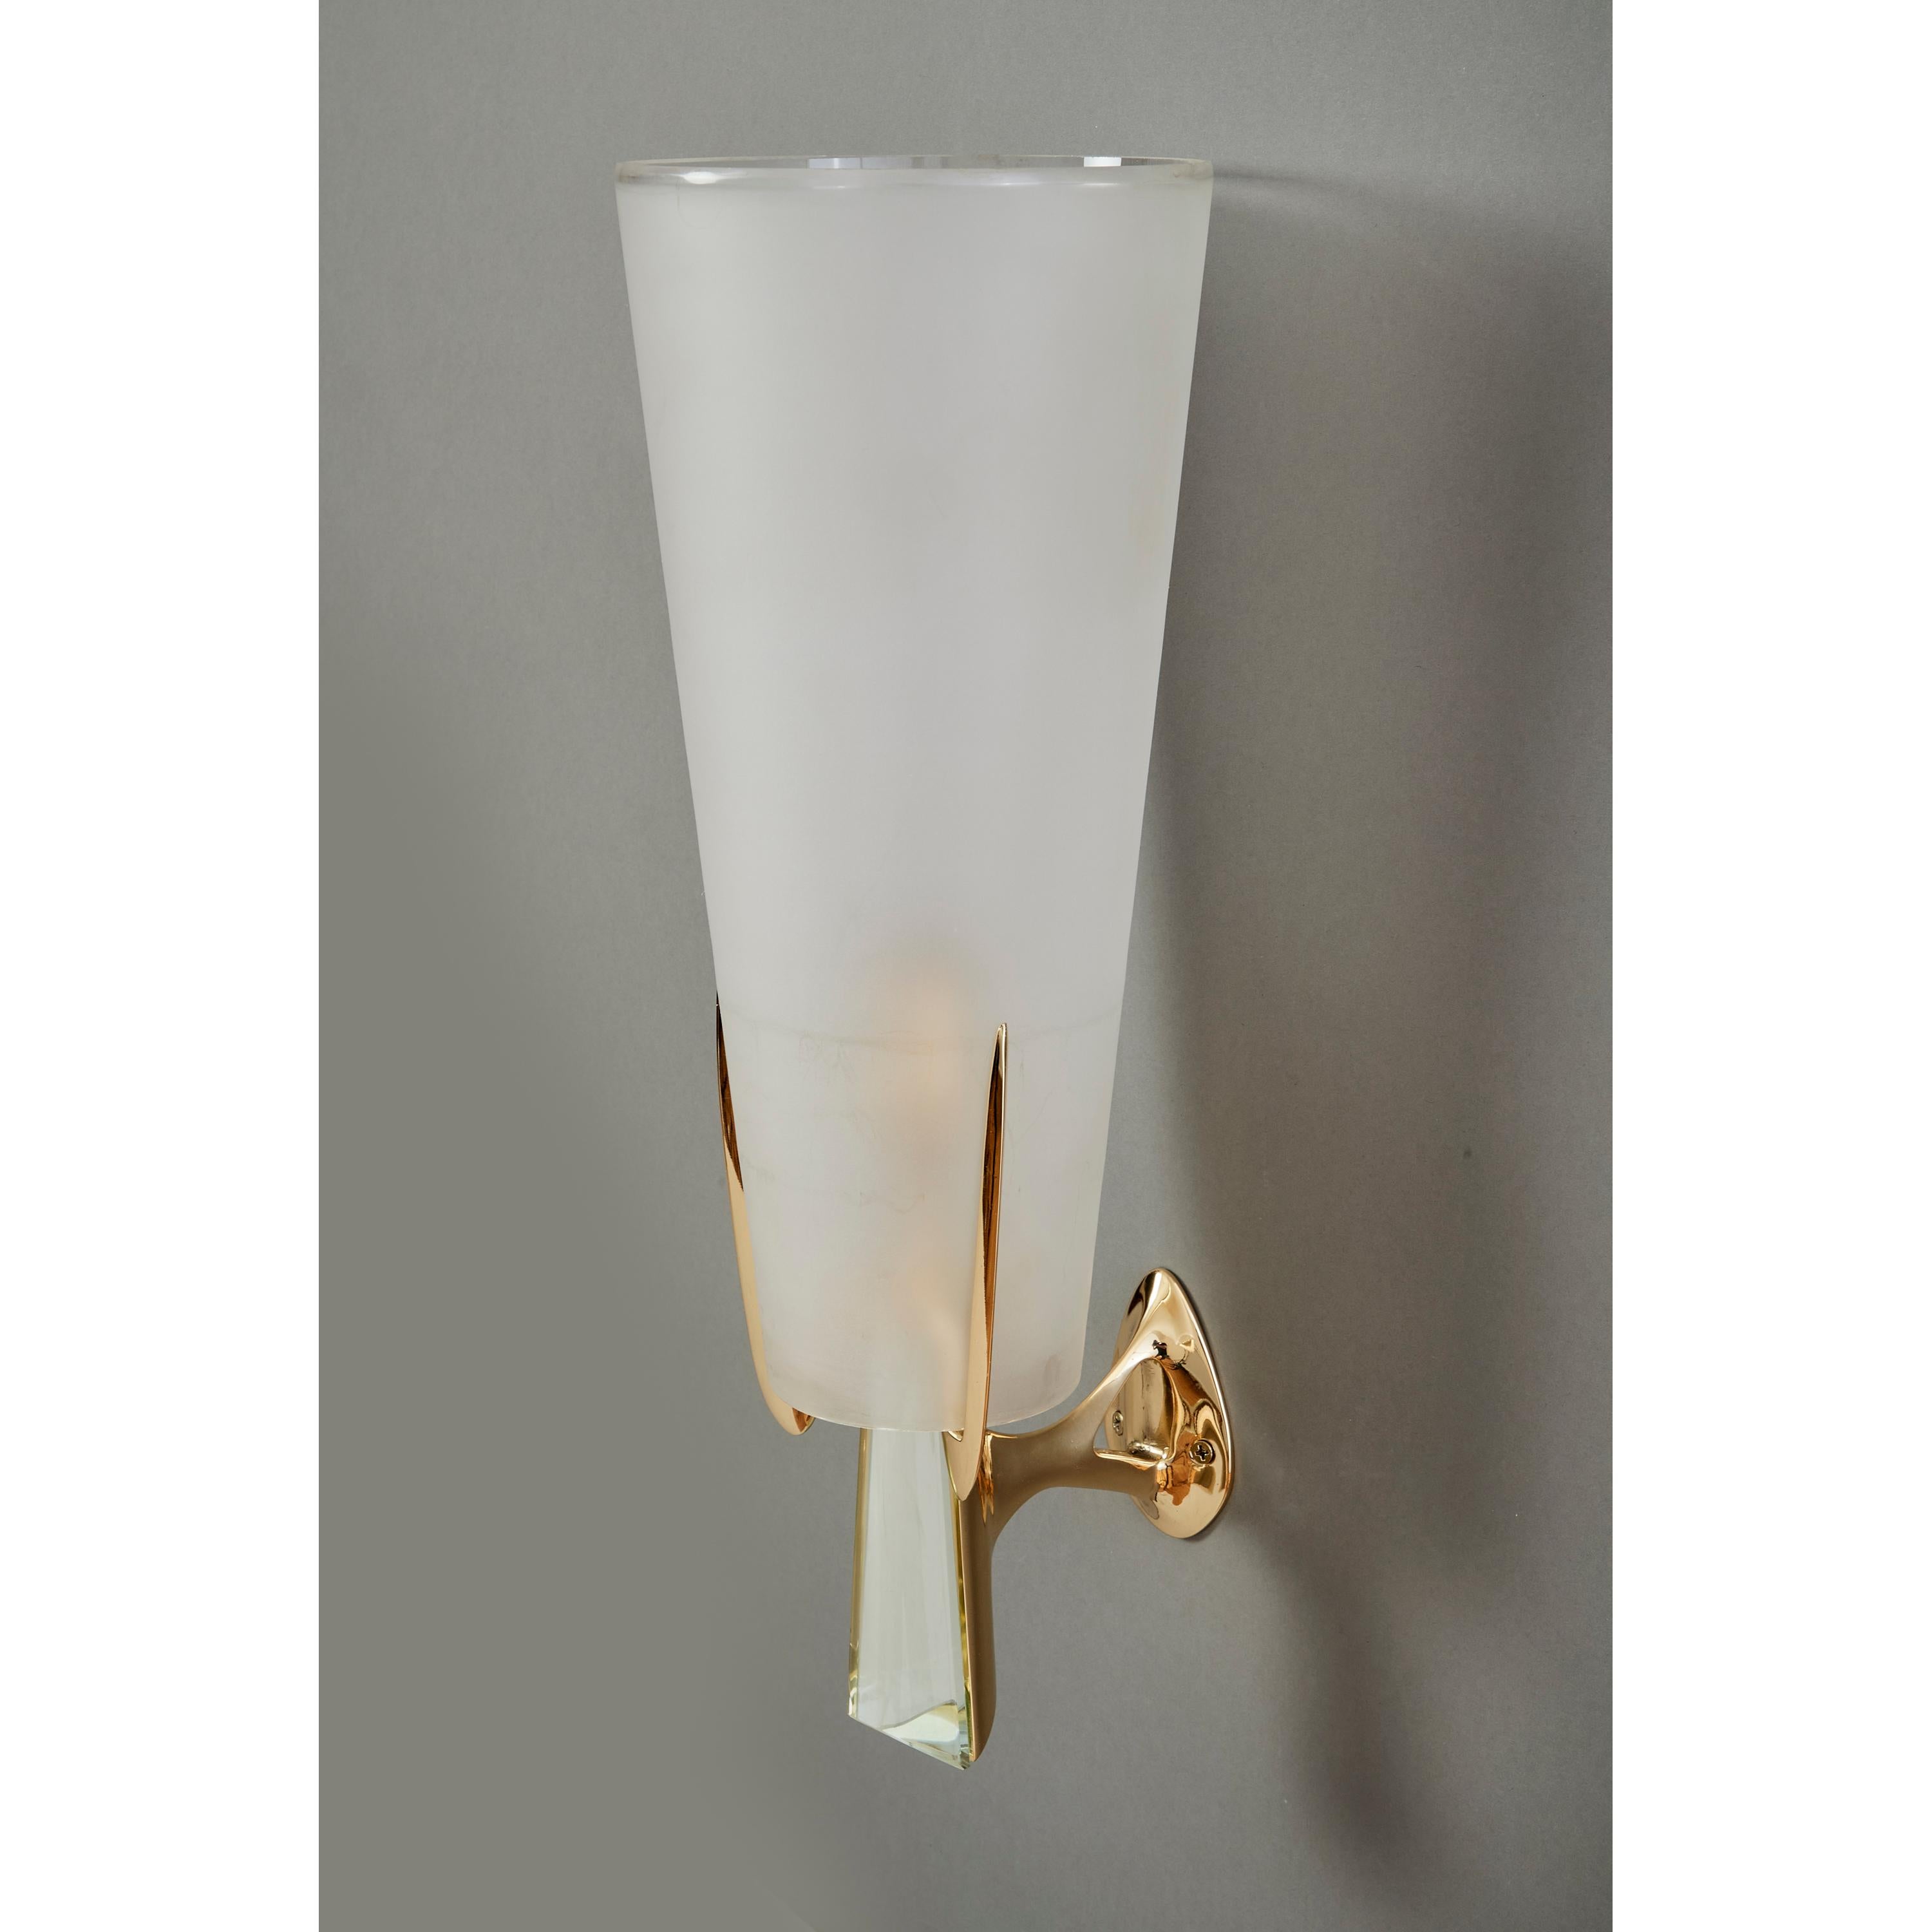 Max Ingrand for Fontana Arte: Rare Sconces in Brass and Crystal, Italy 1955 For Sale 3